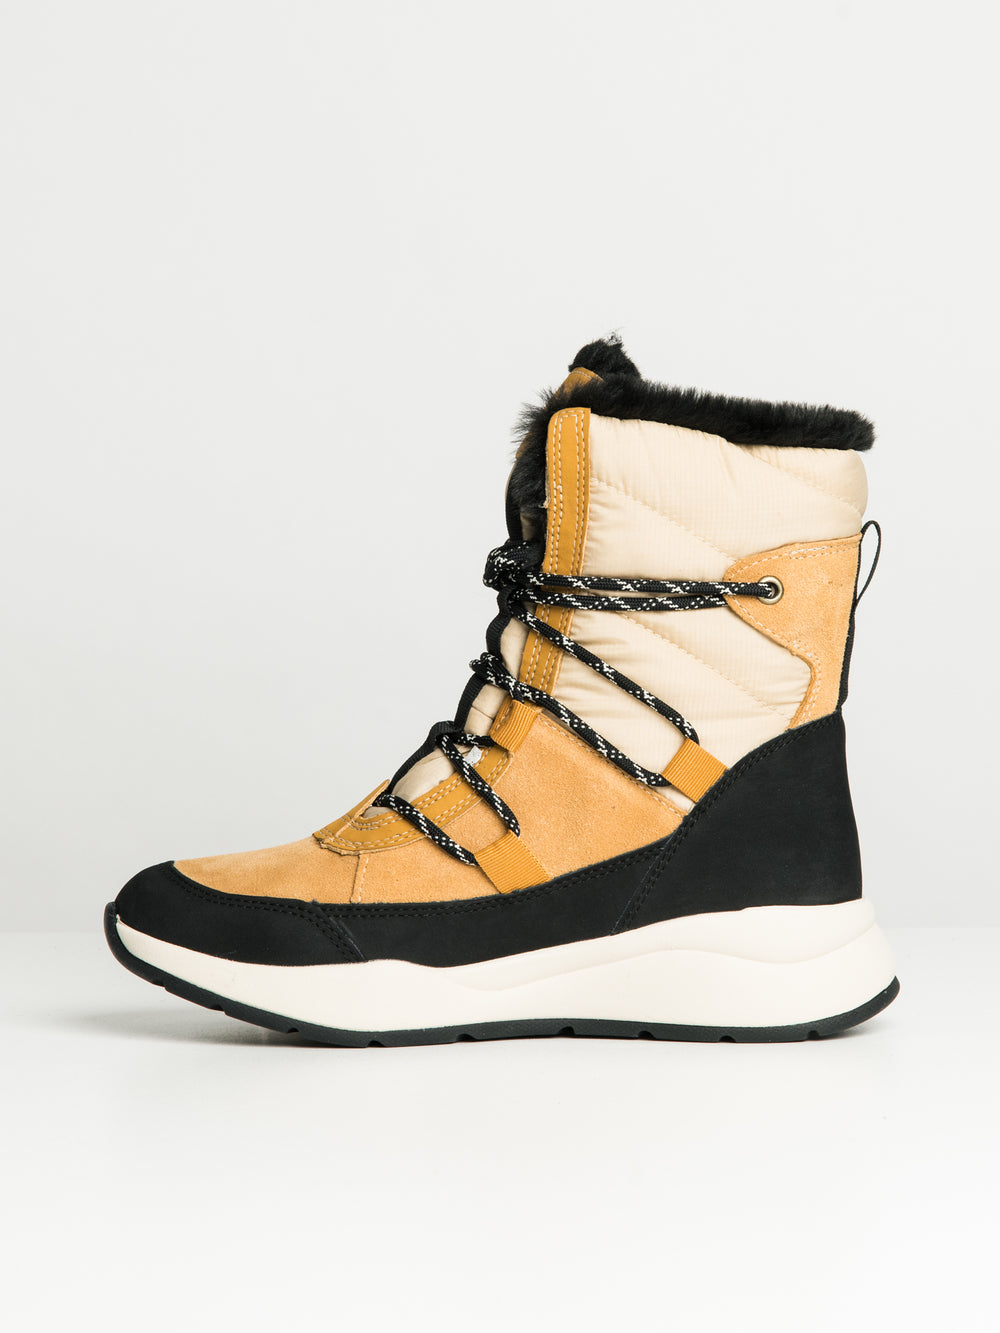 WOMENS TIMBERLAND BOROUGHS MID LACE-UP WINTER WATERPROOF BOOT - CLEARANCE